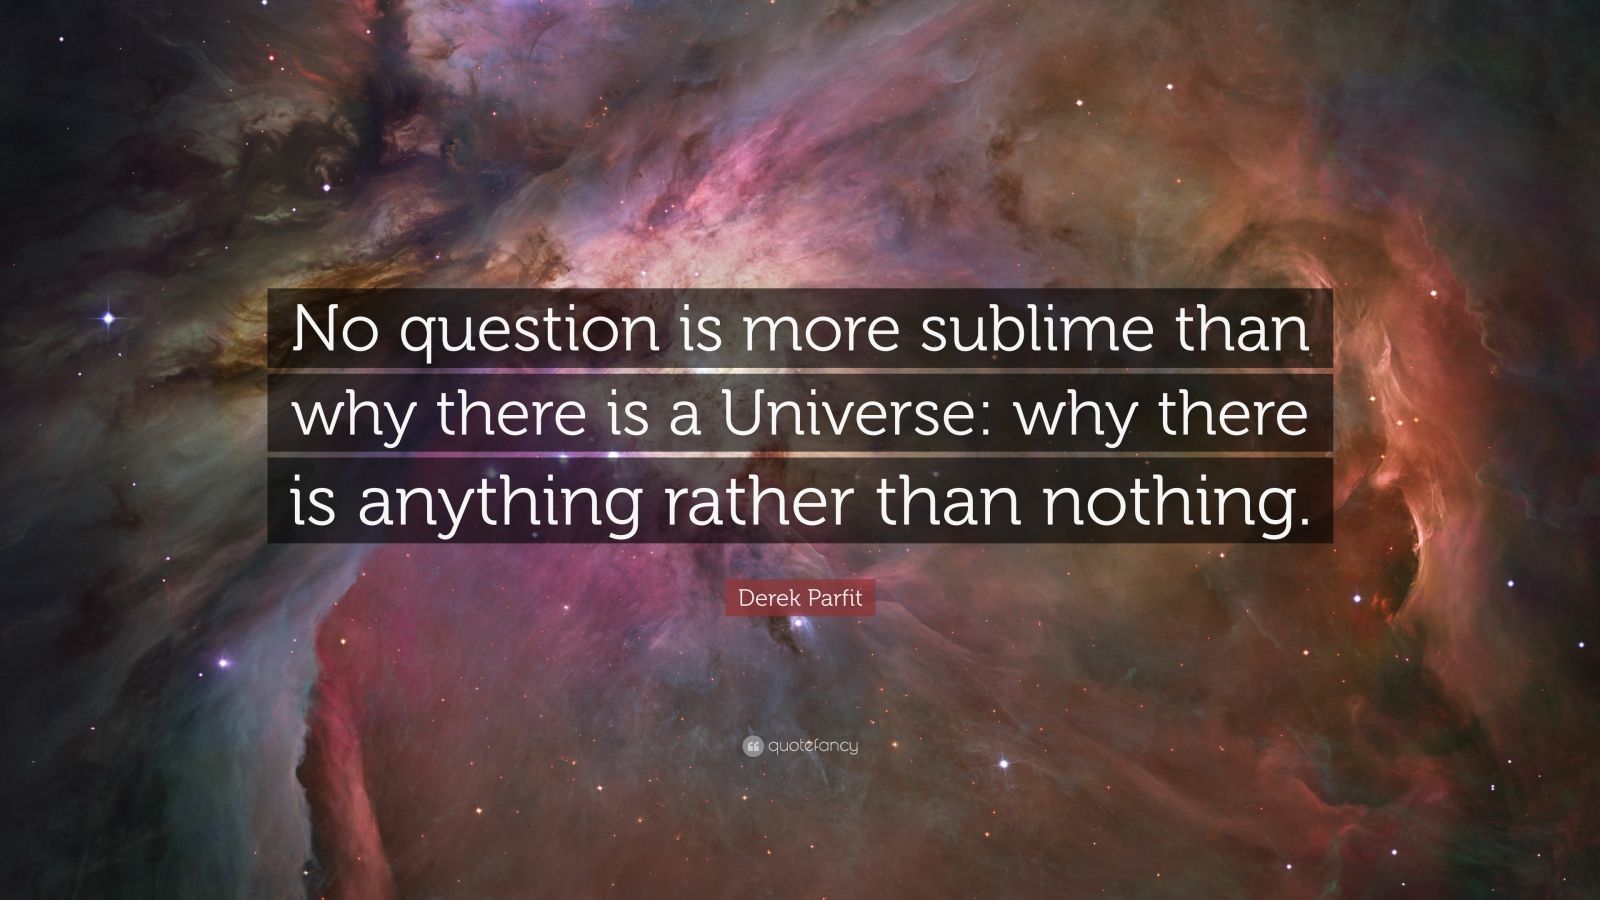 Derek Parfit Quote: “No question is more sublime than why there is a ...